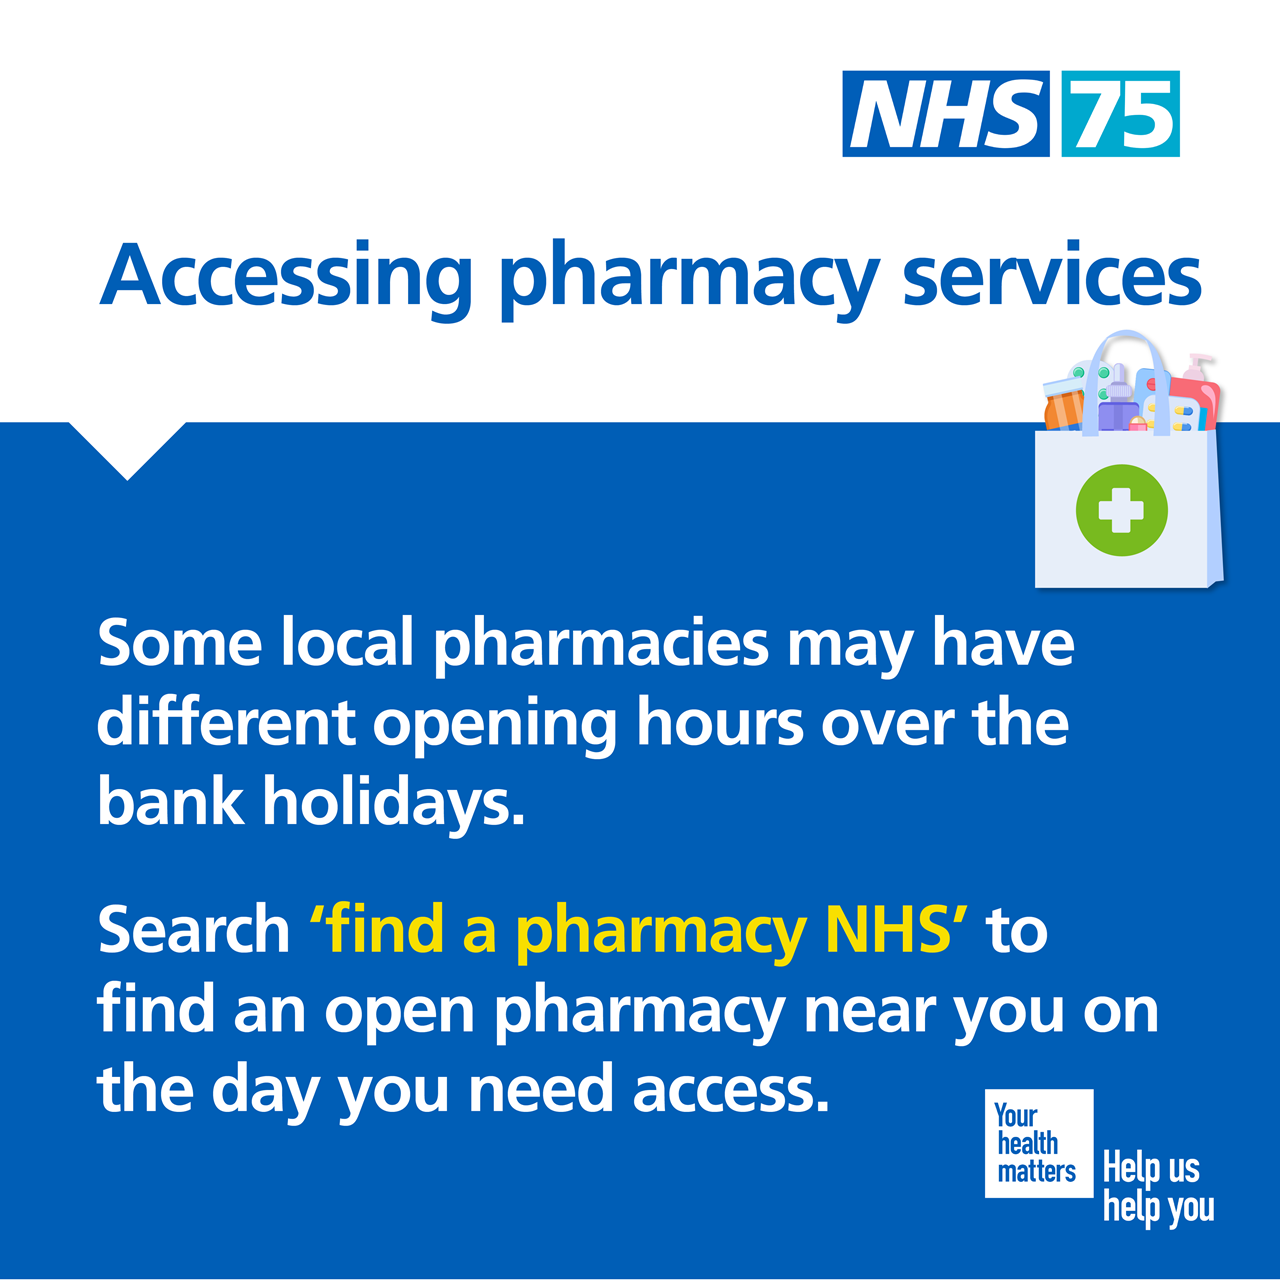 Accessing pharmacy services poster